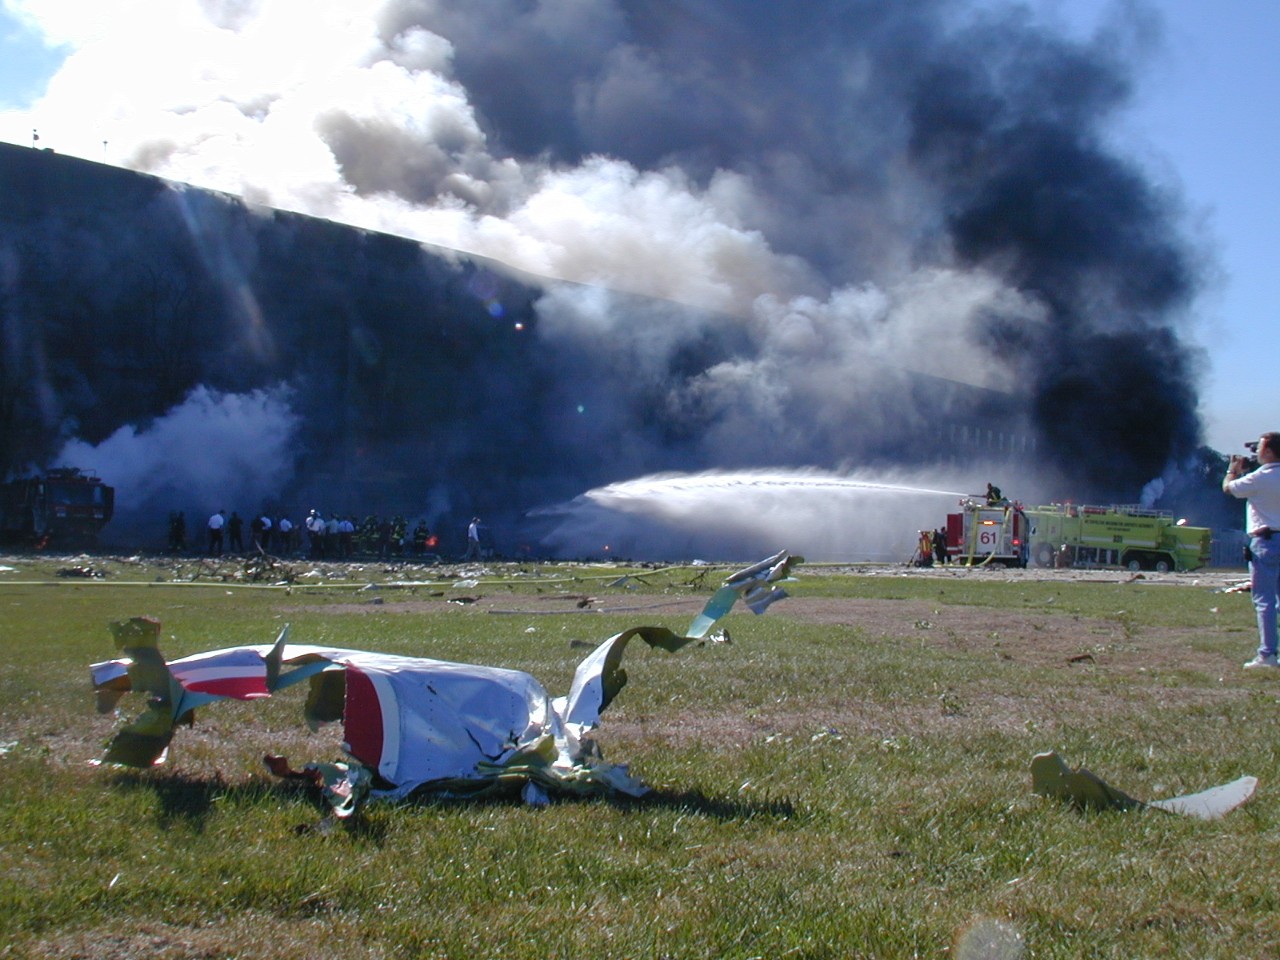 A piece of aircraft lies in the grass while fire crews work to put out the flames in the minutes after the attack, 11 September 2001